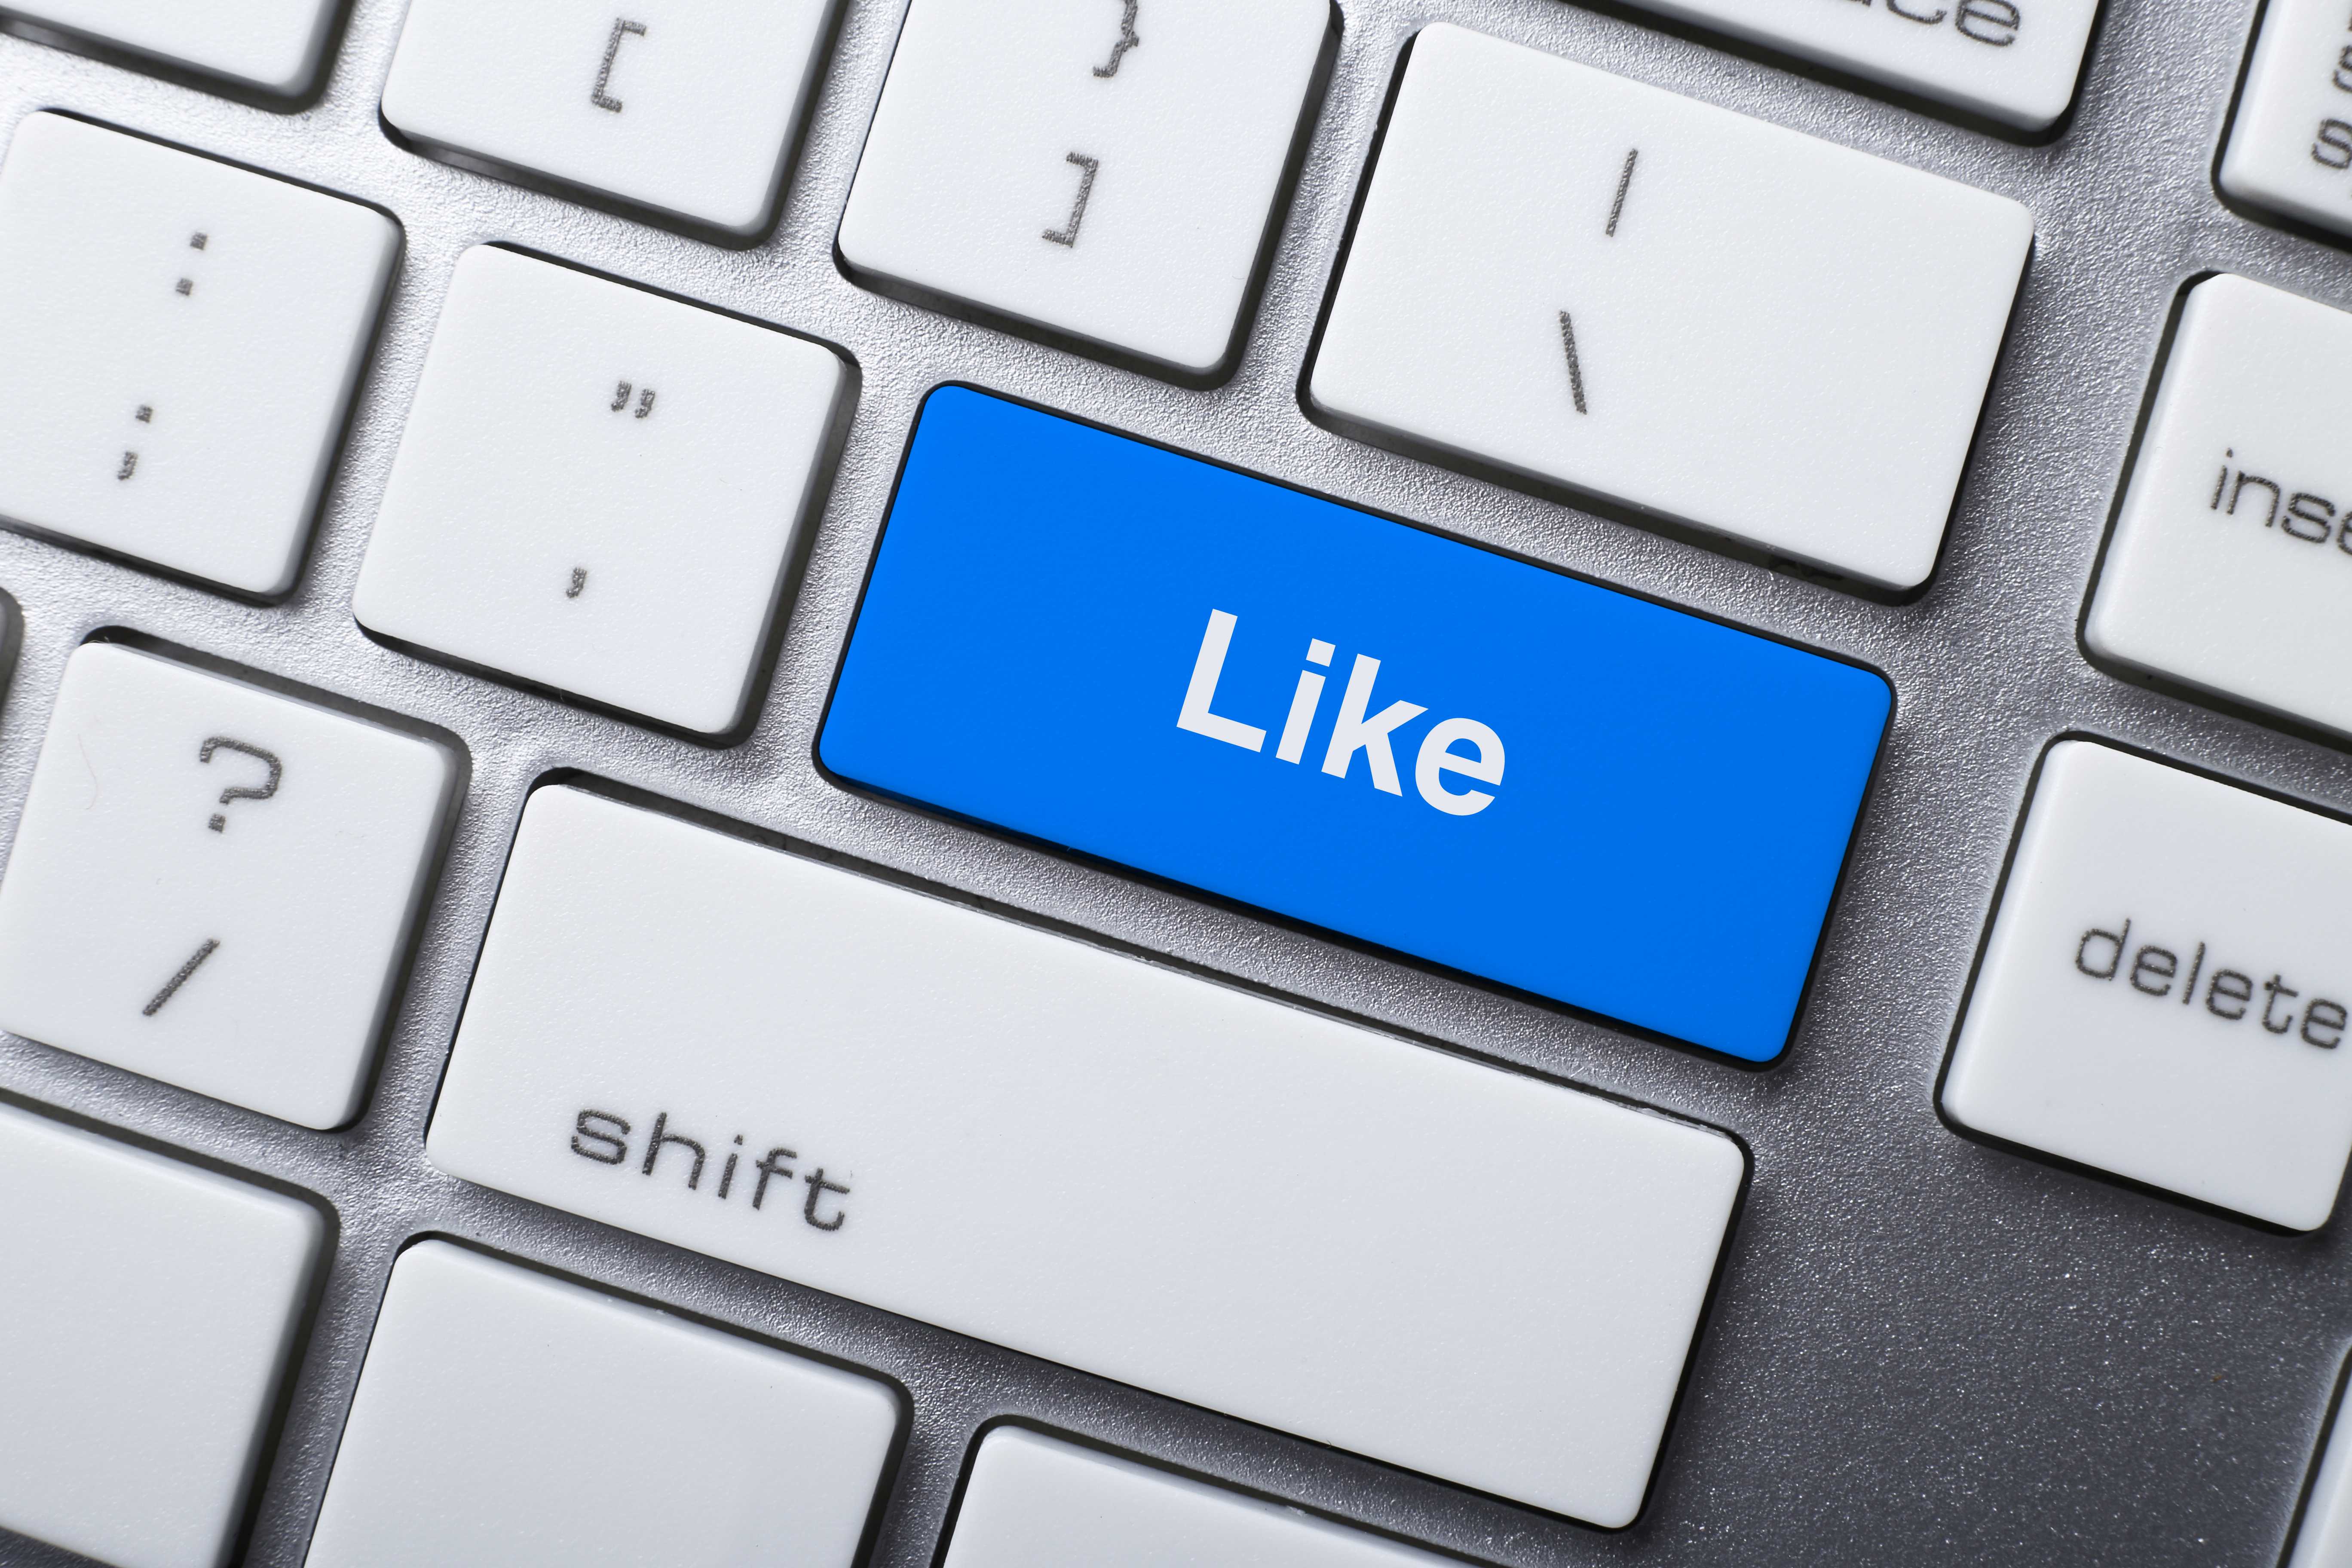 Facebook Likes Don’t Matter Anymore